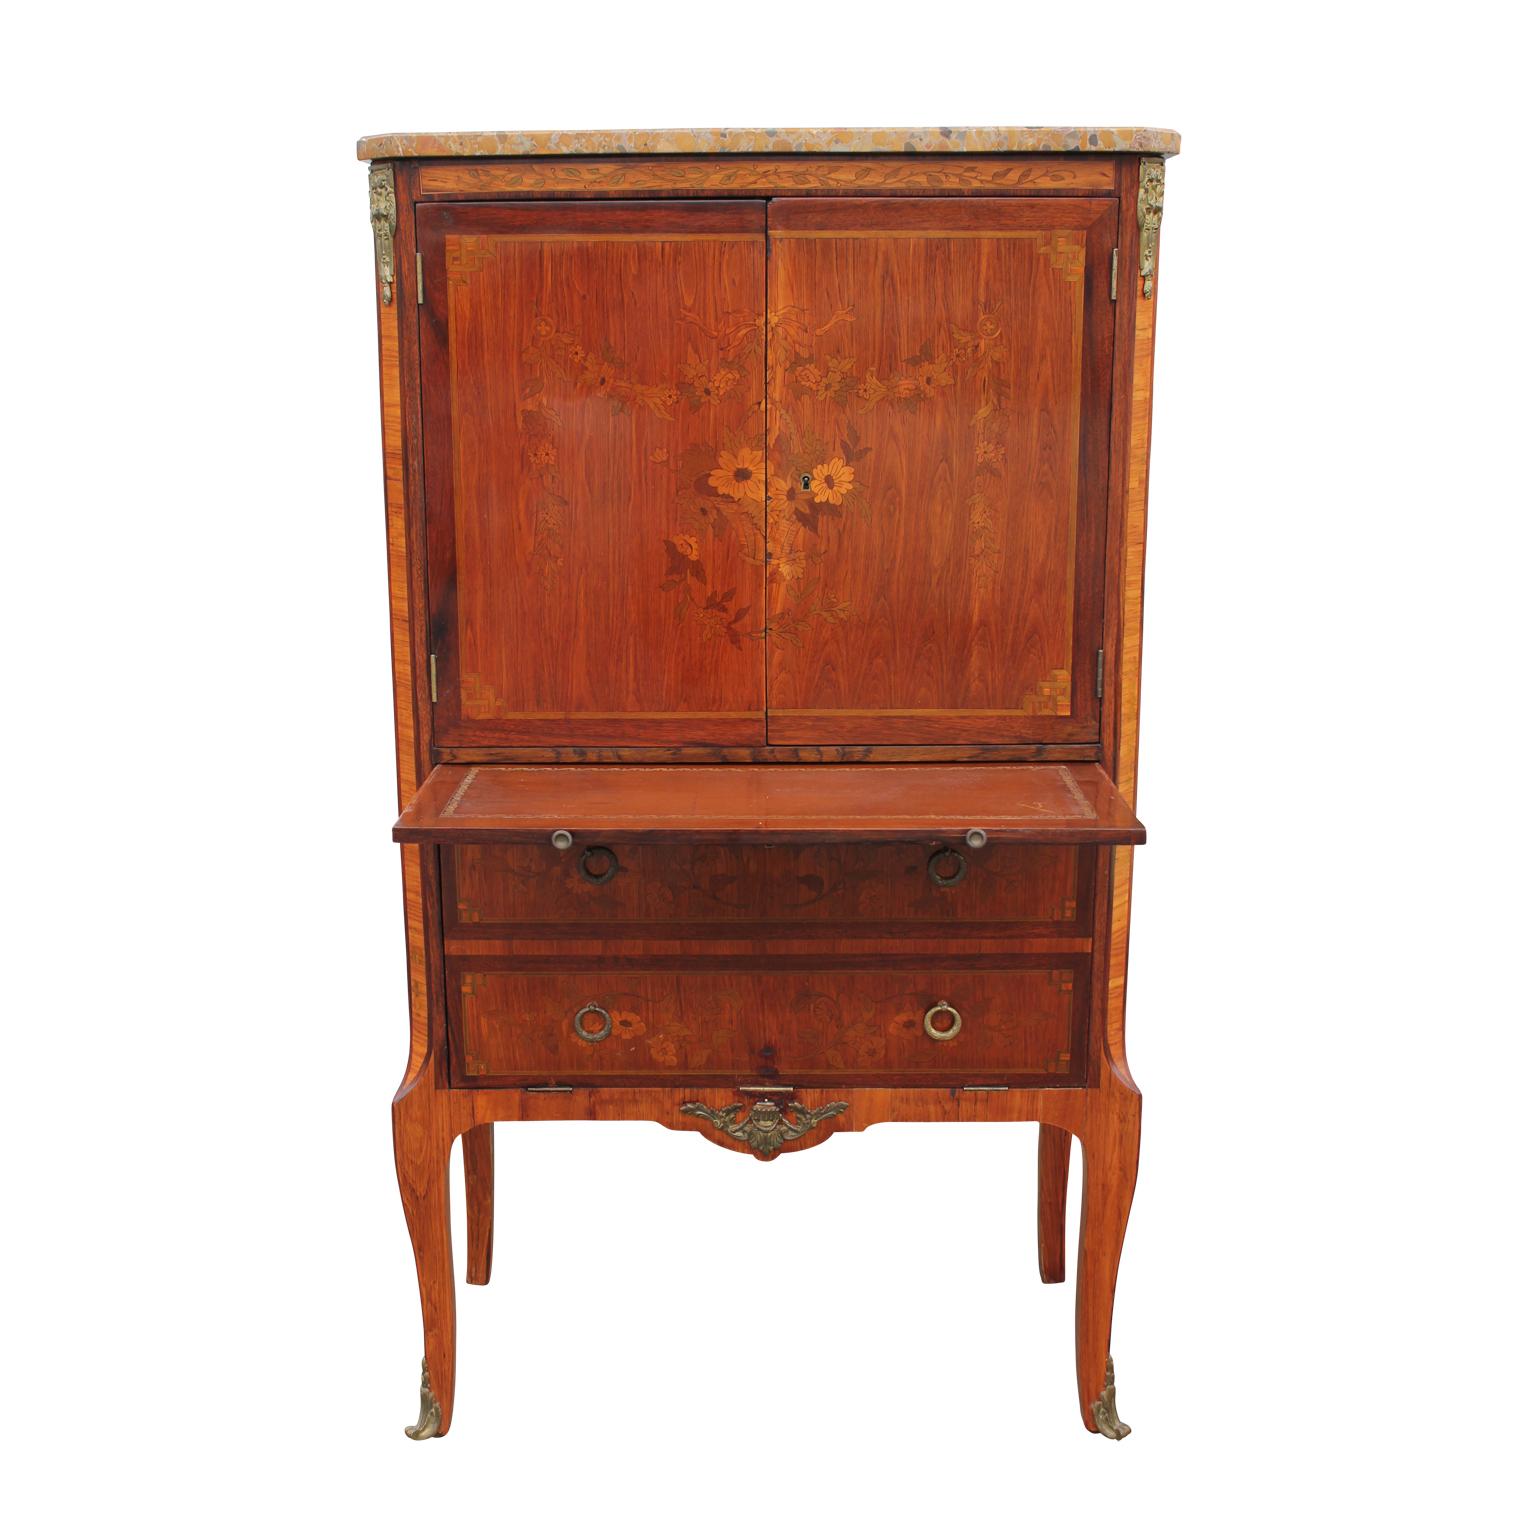 Antique inlaid kingwood secretary cabinet with a drop down bottom cabinet. The writing surface pulls out from under the top cabinet. Inside the top cabinet is a silk lined interior with a shelf. It has gold plated brass details.